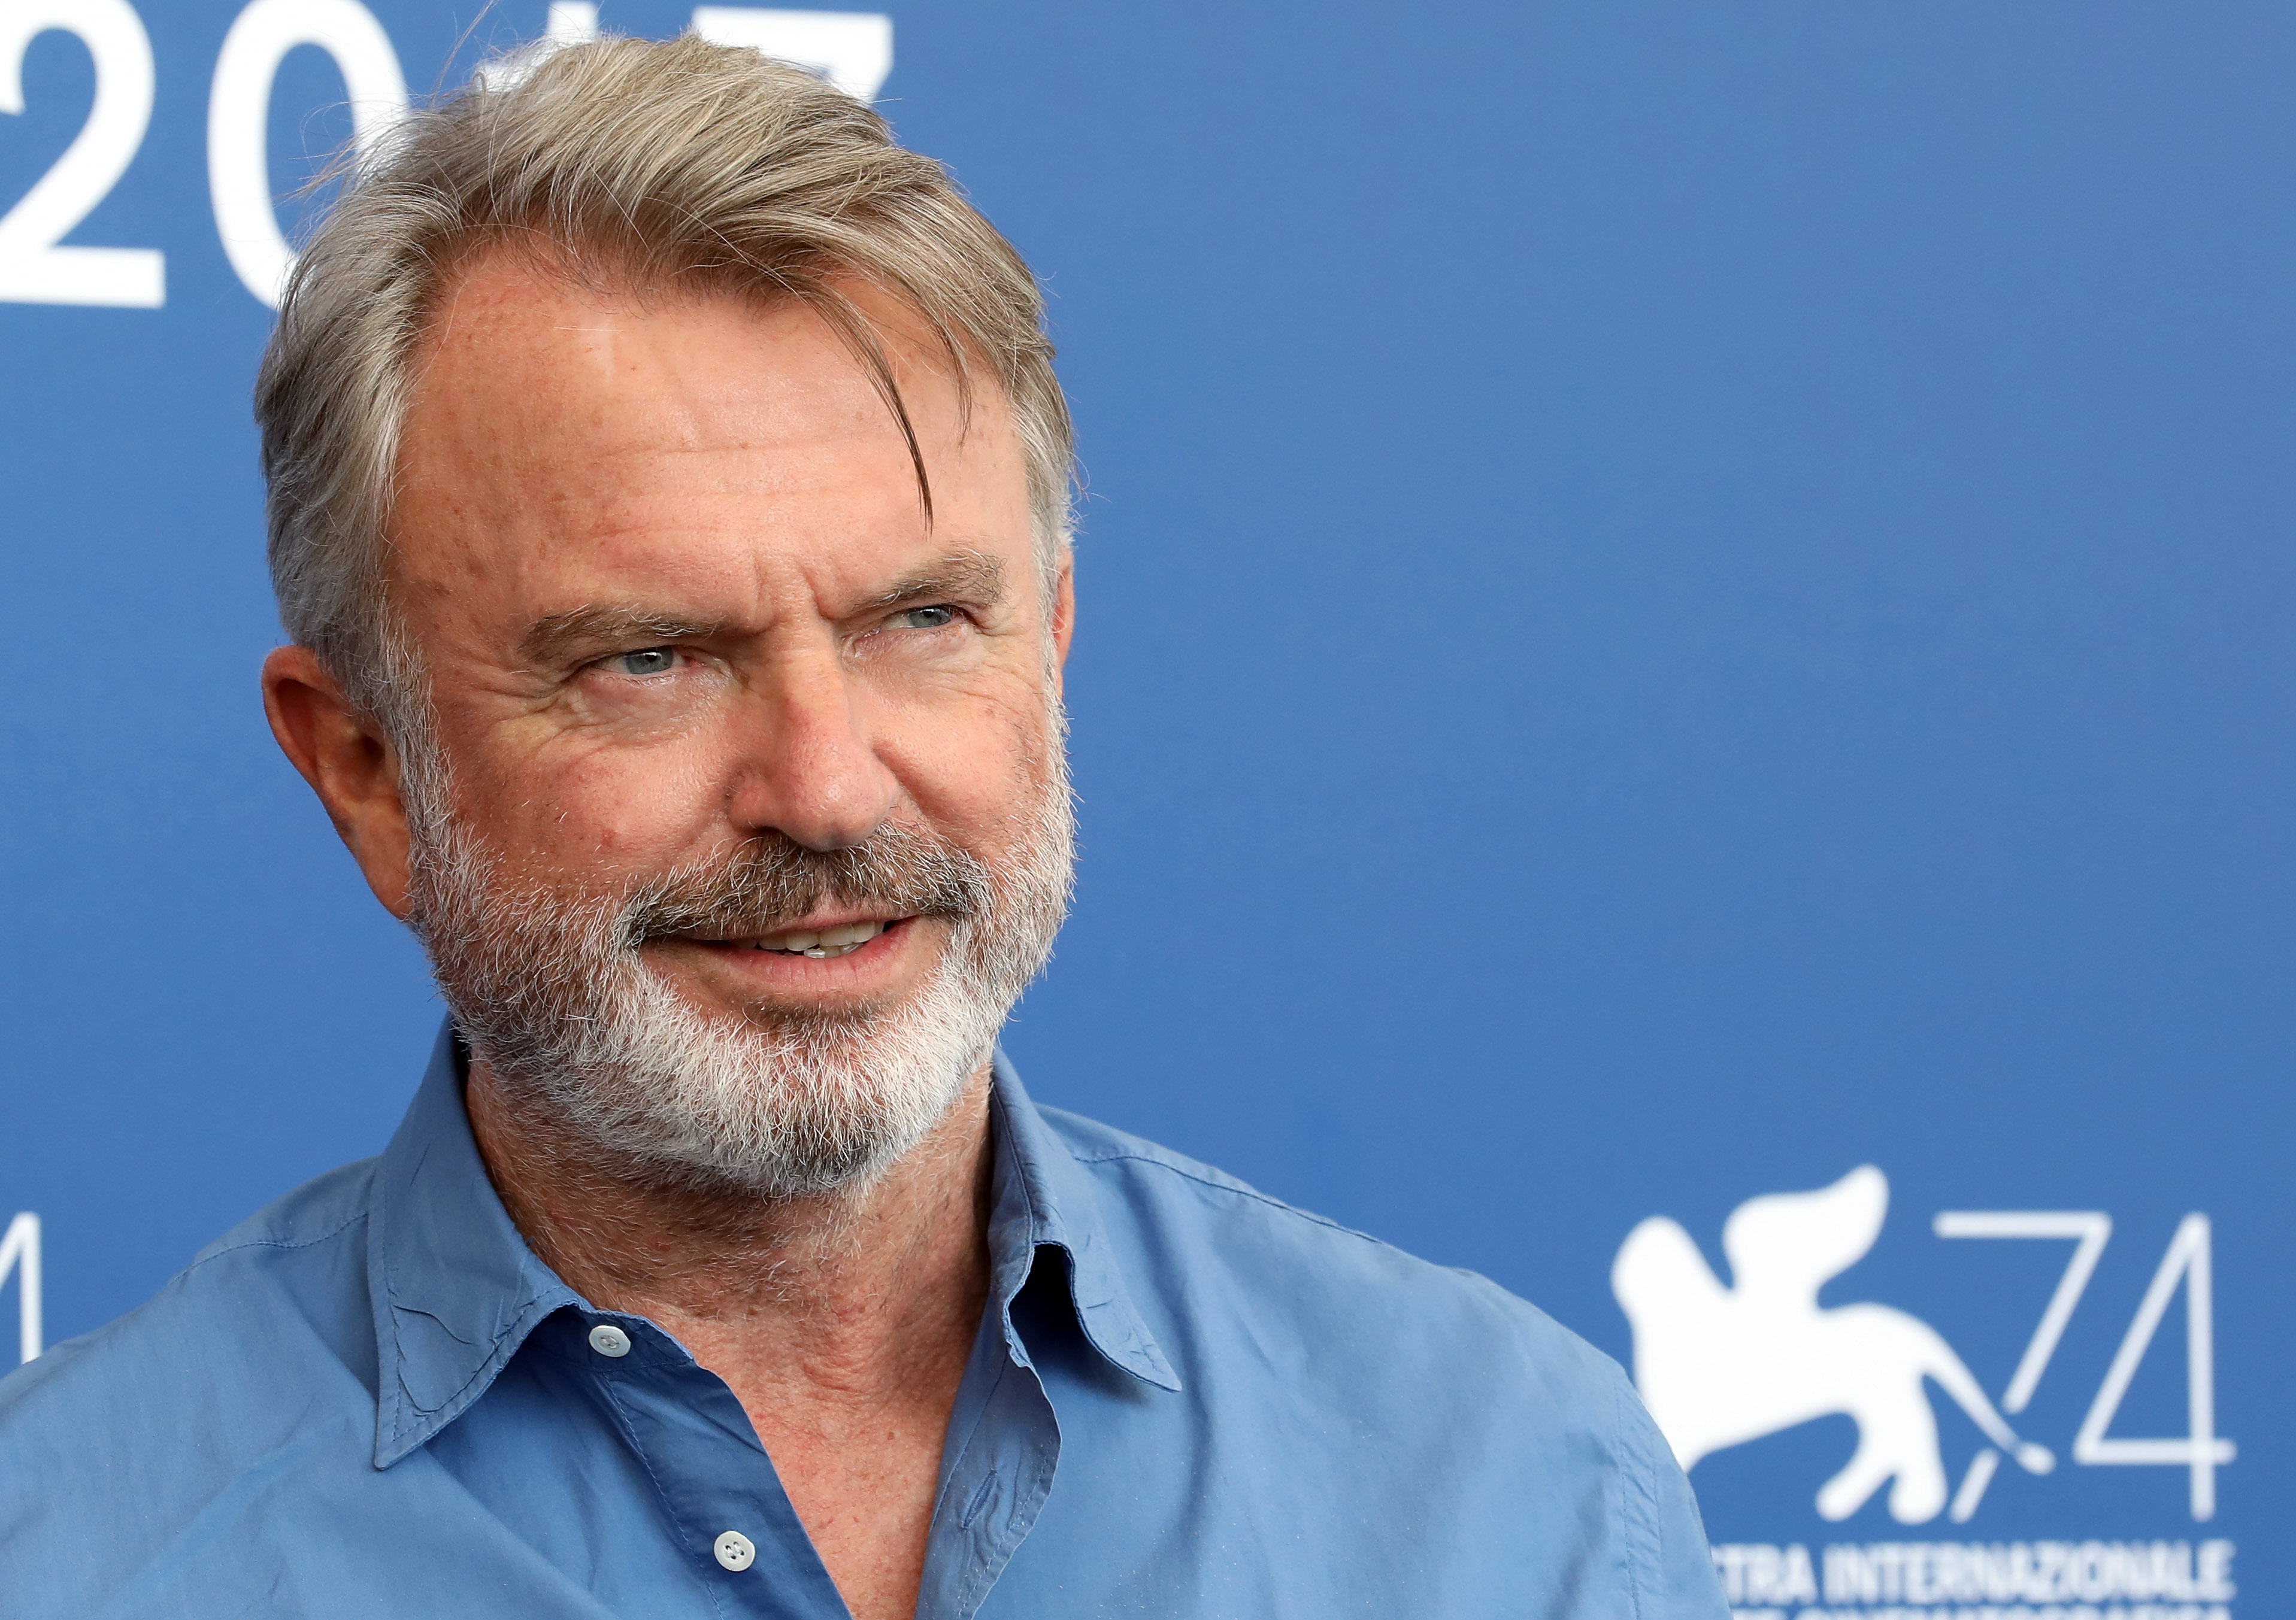 Sam Neill attends the 'Sweet Country' photocall during the 74th Venice Film Festival on September 6, 2017 in Venice, Italy. | Source: Getty Images